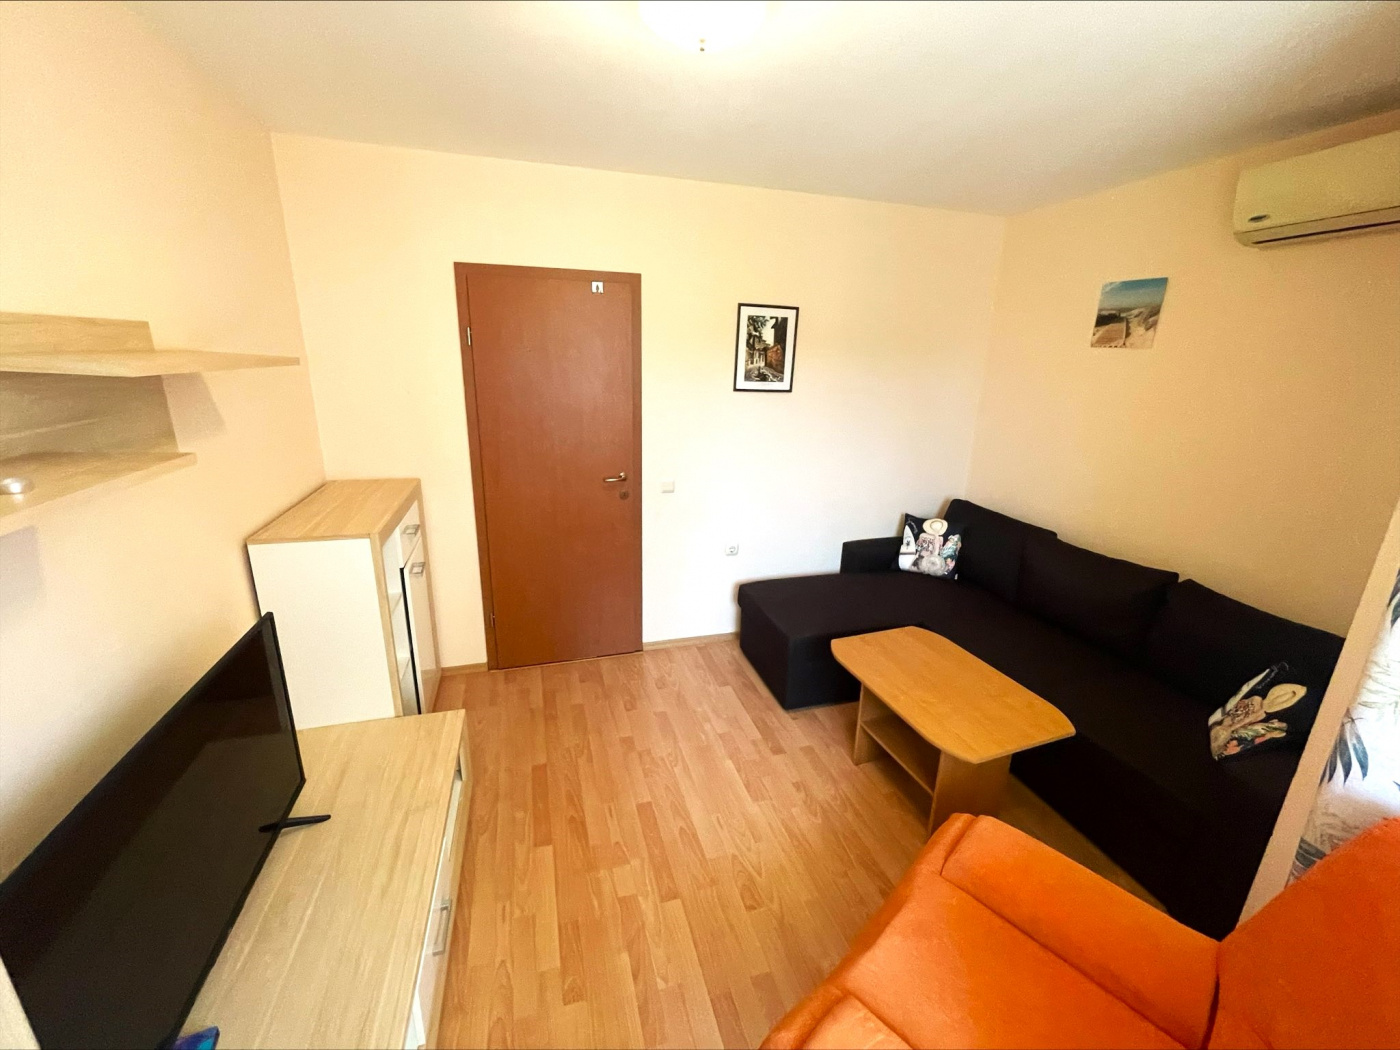 Holiday&Orchid apartment Hol B4 821